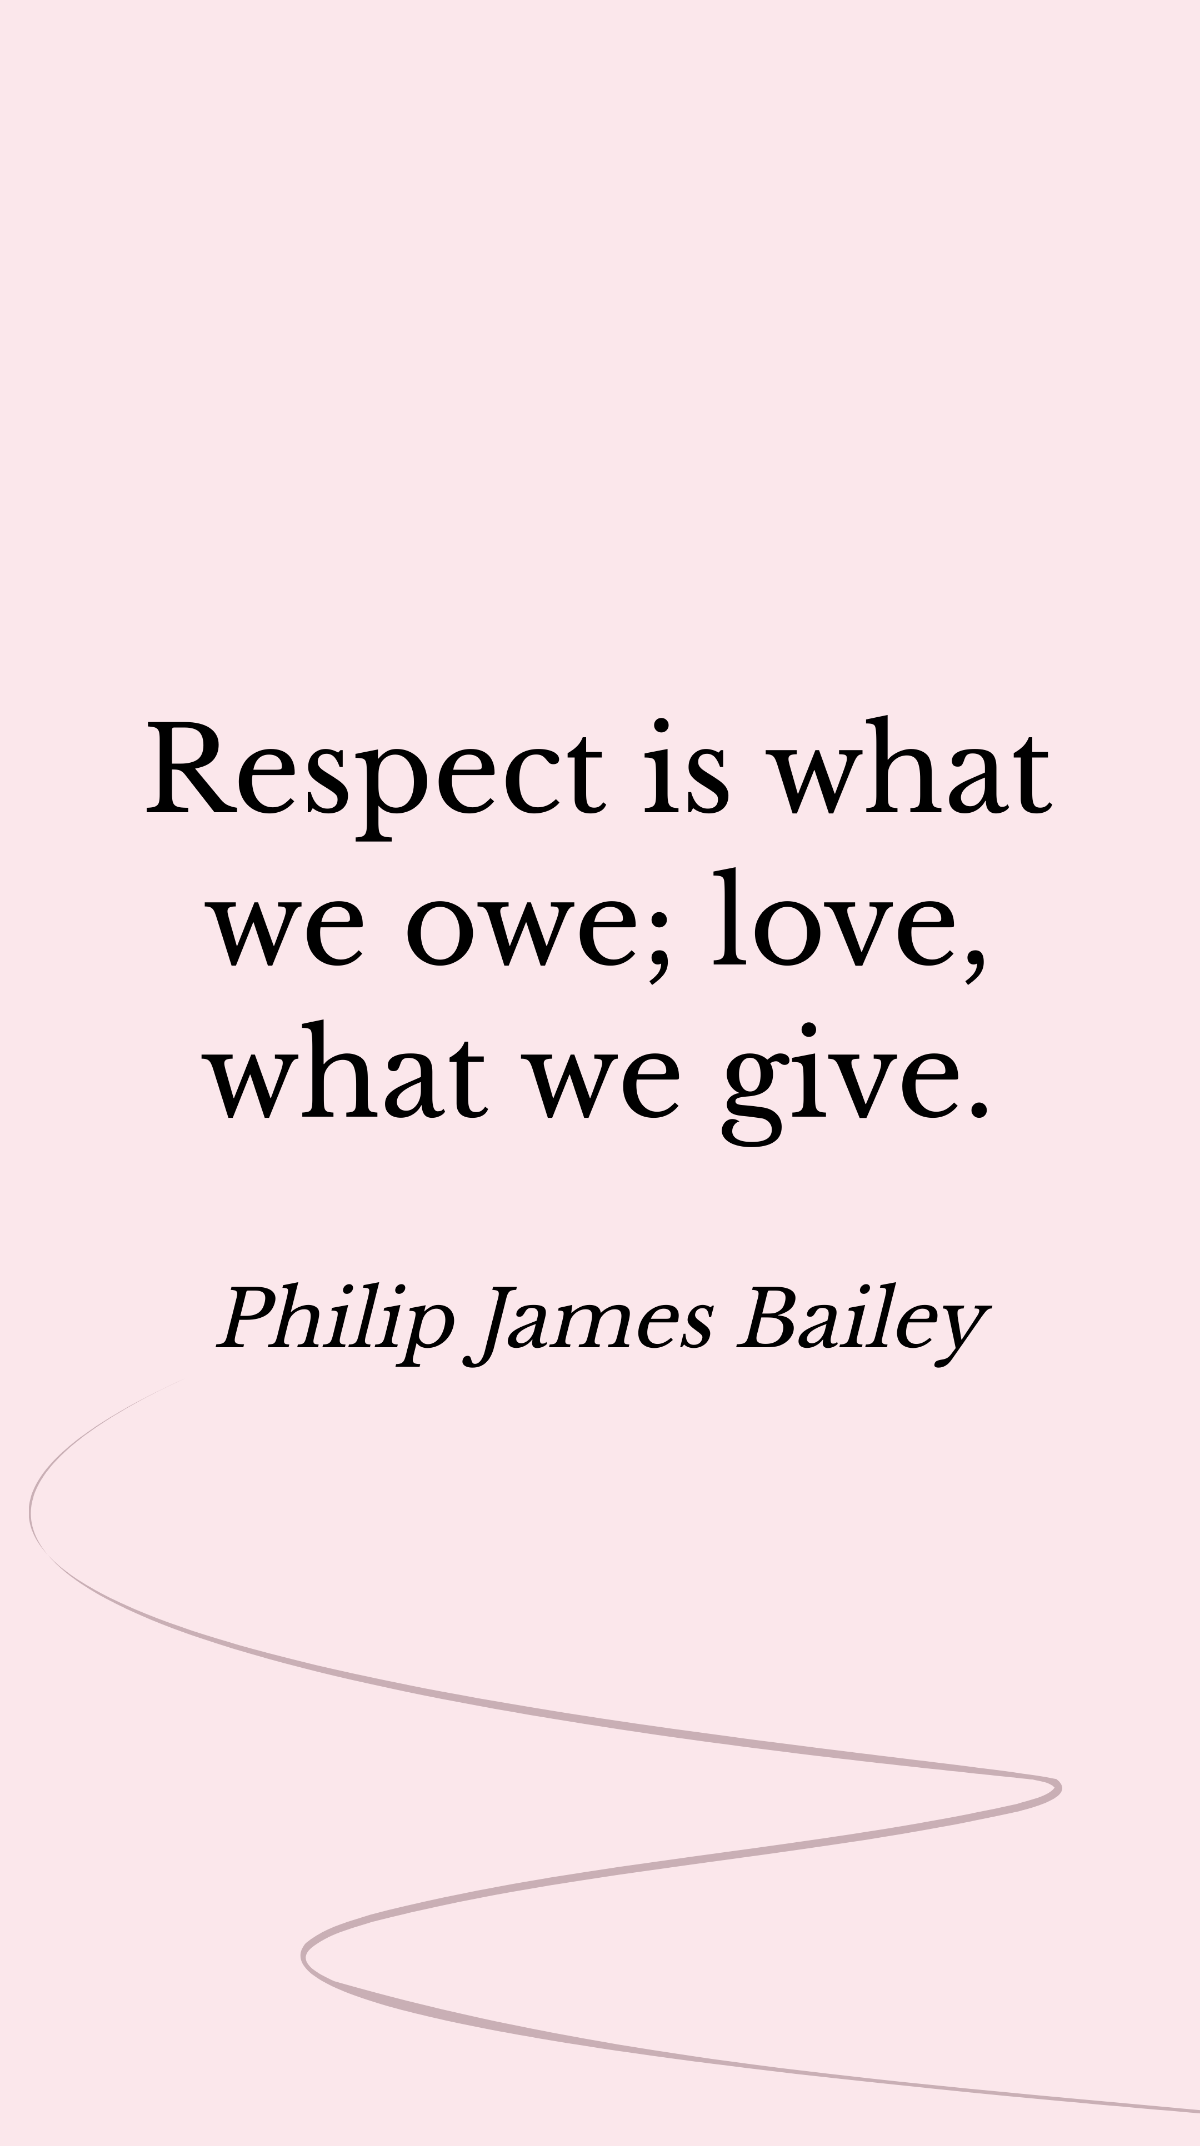 Philip James Bailey - Respect is what we owe; love, what we give. Template